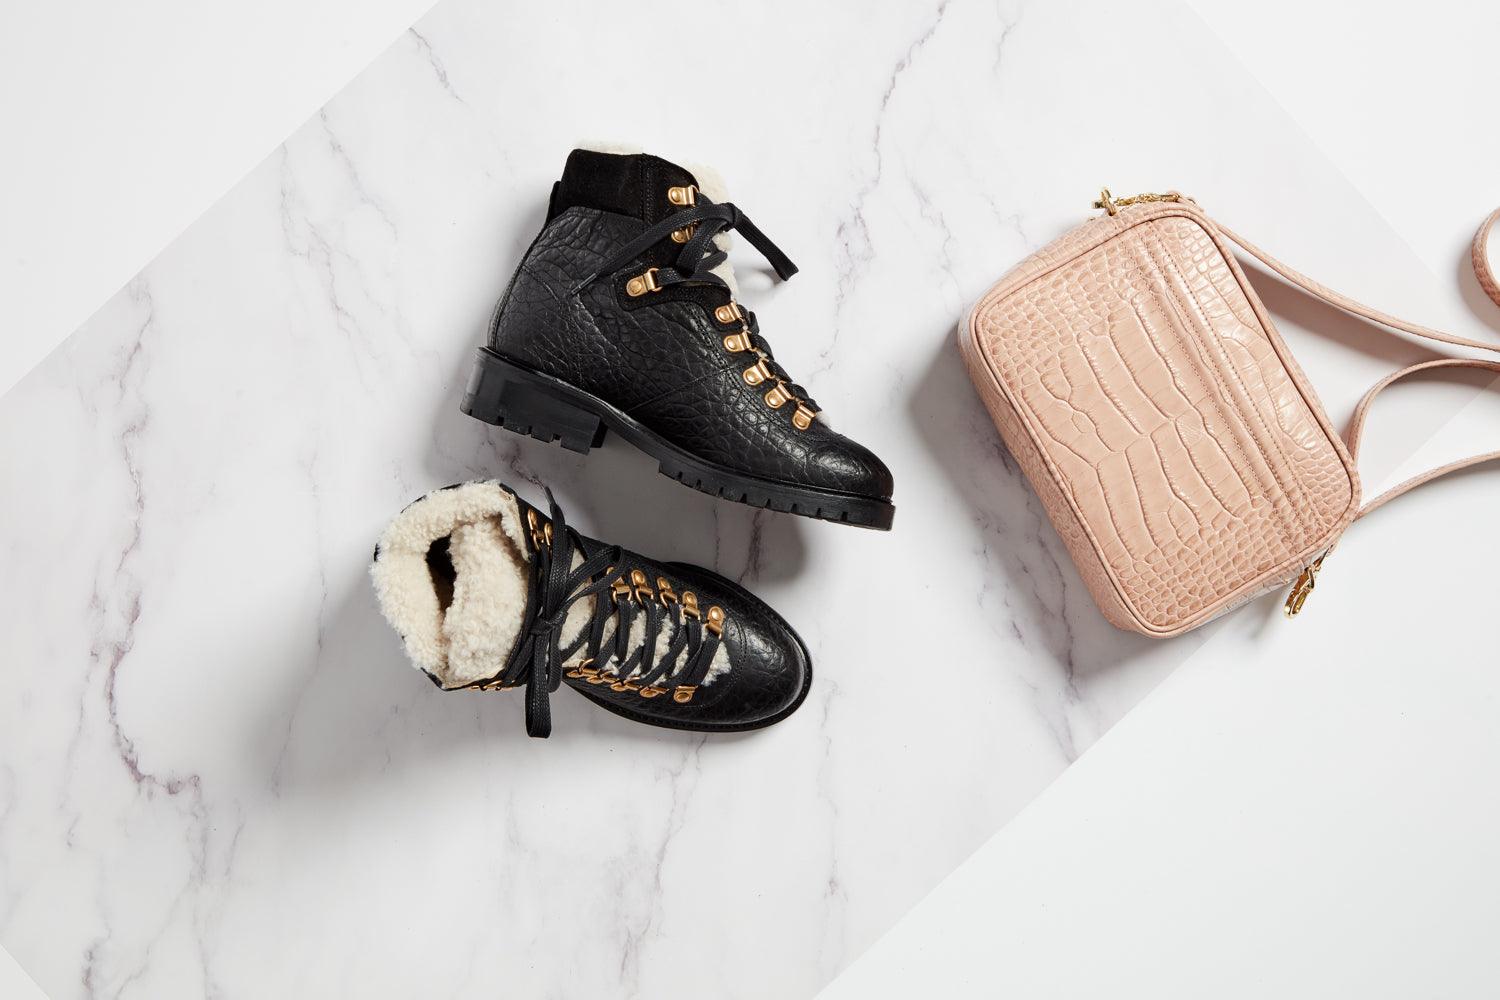 Anonymous Copenhagen Black Grain Leather lace up boots with shearling inner and gold hardware.